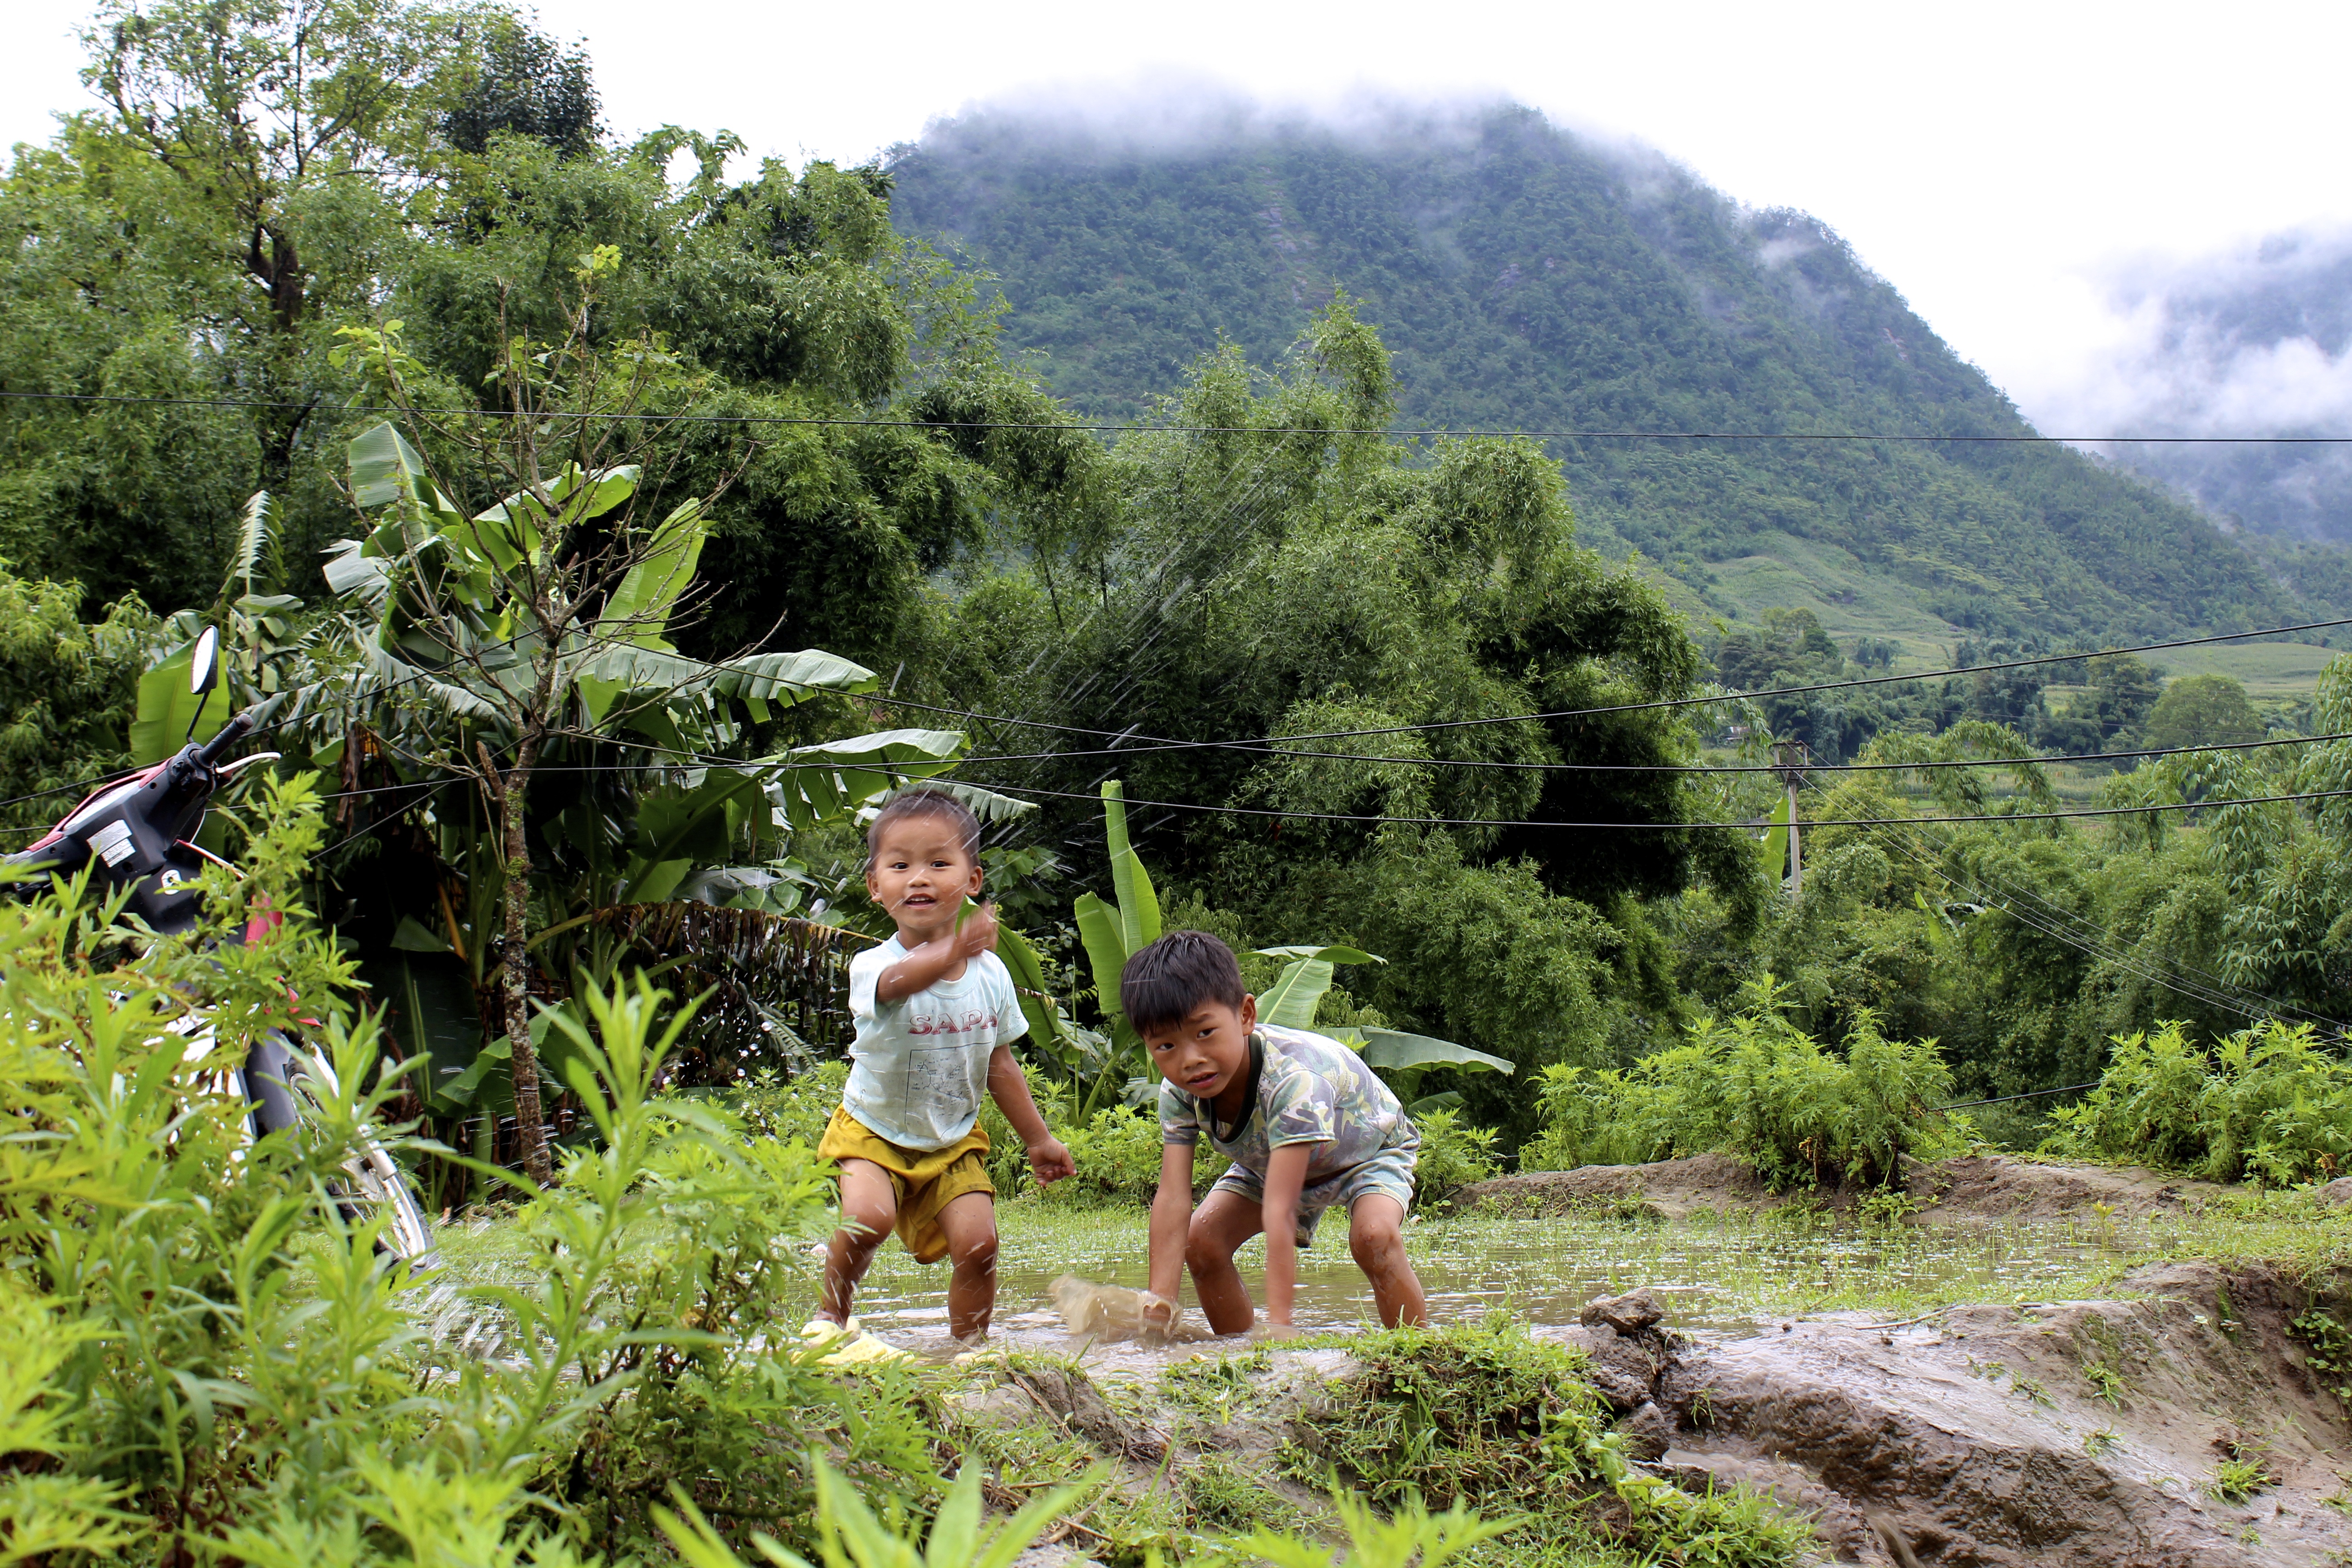 Two little boys play in their family's rice paddies.